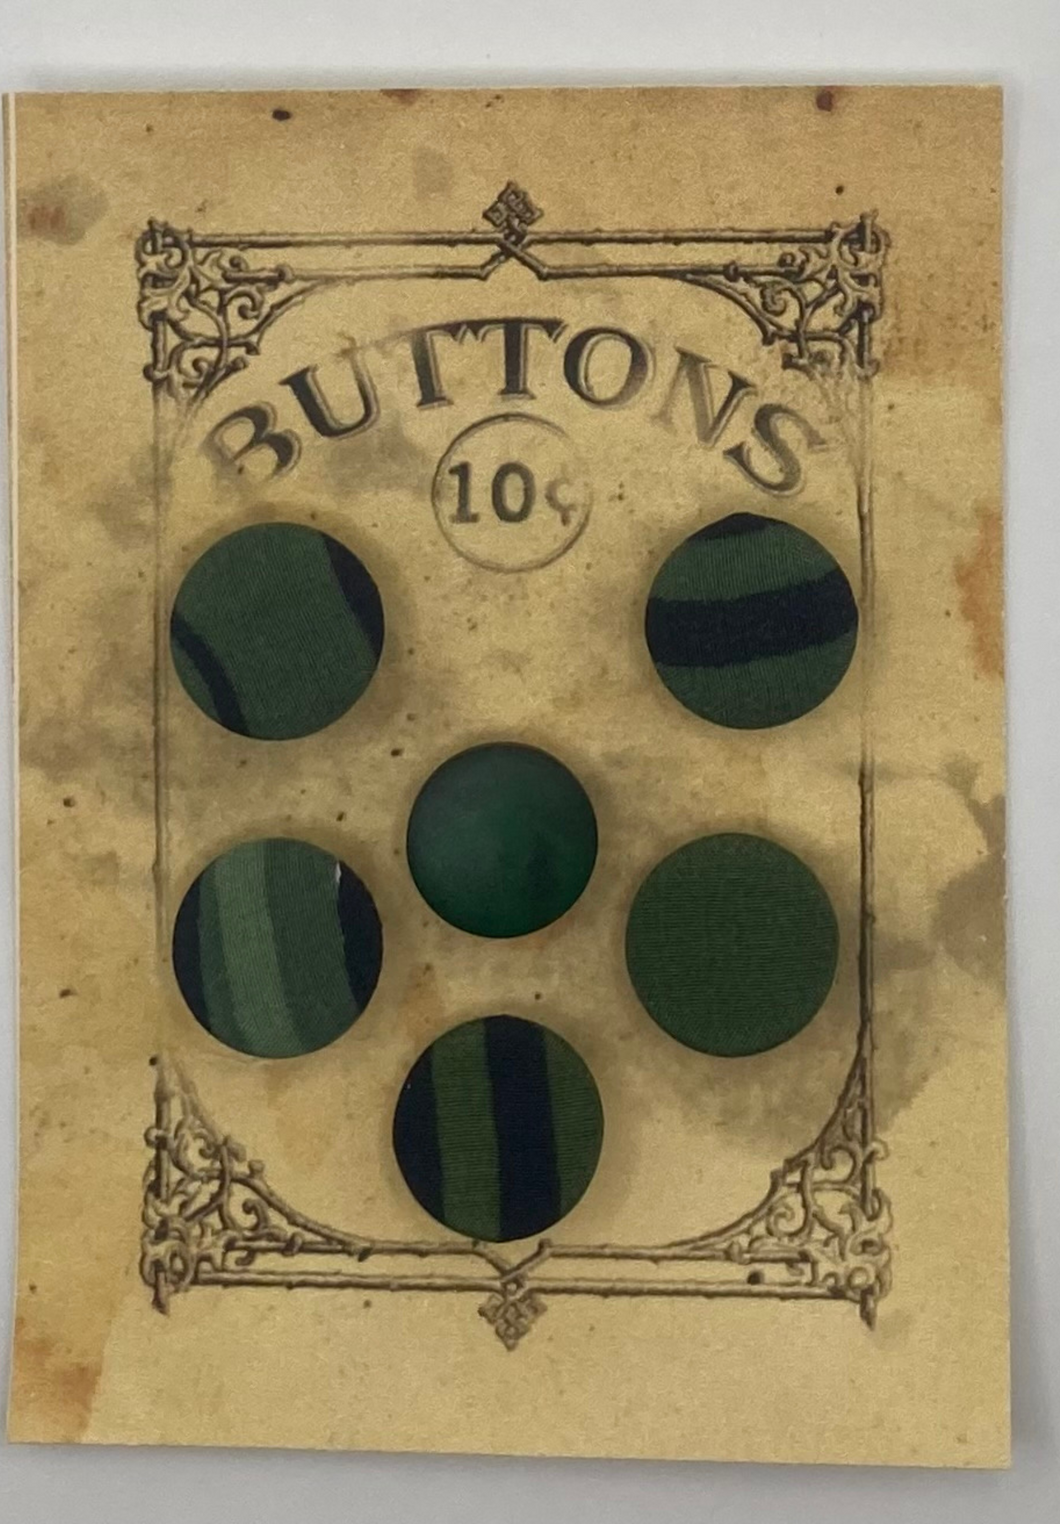 Vintage Green and Black Stripe Covered Buttons